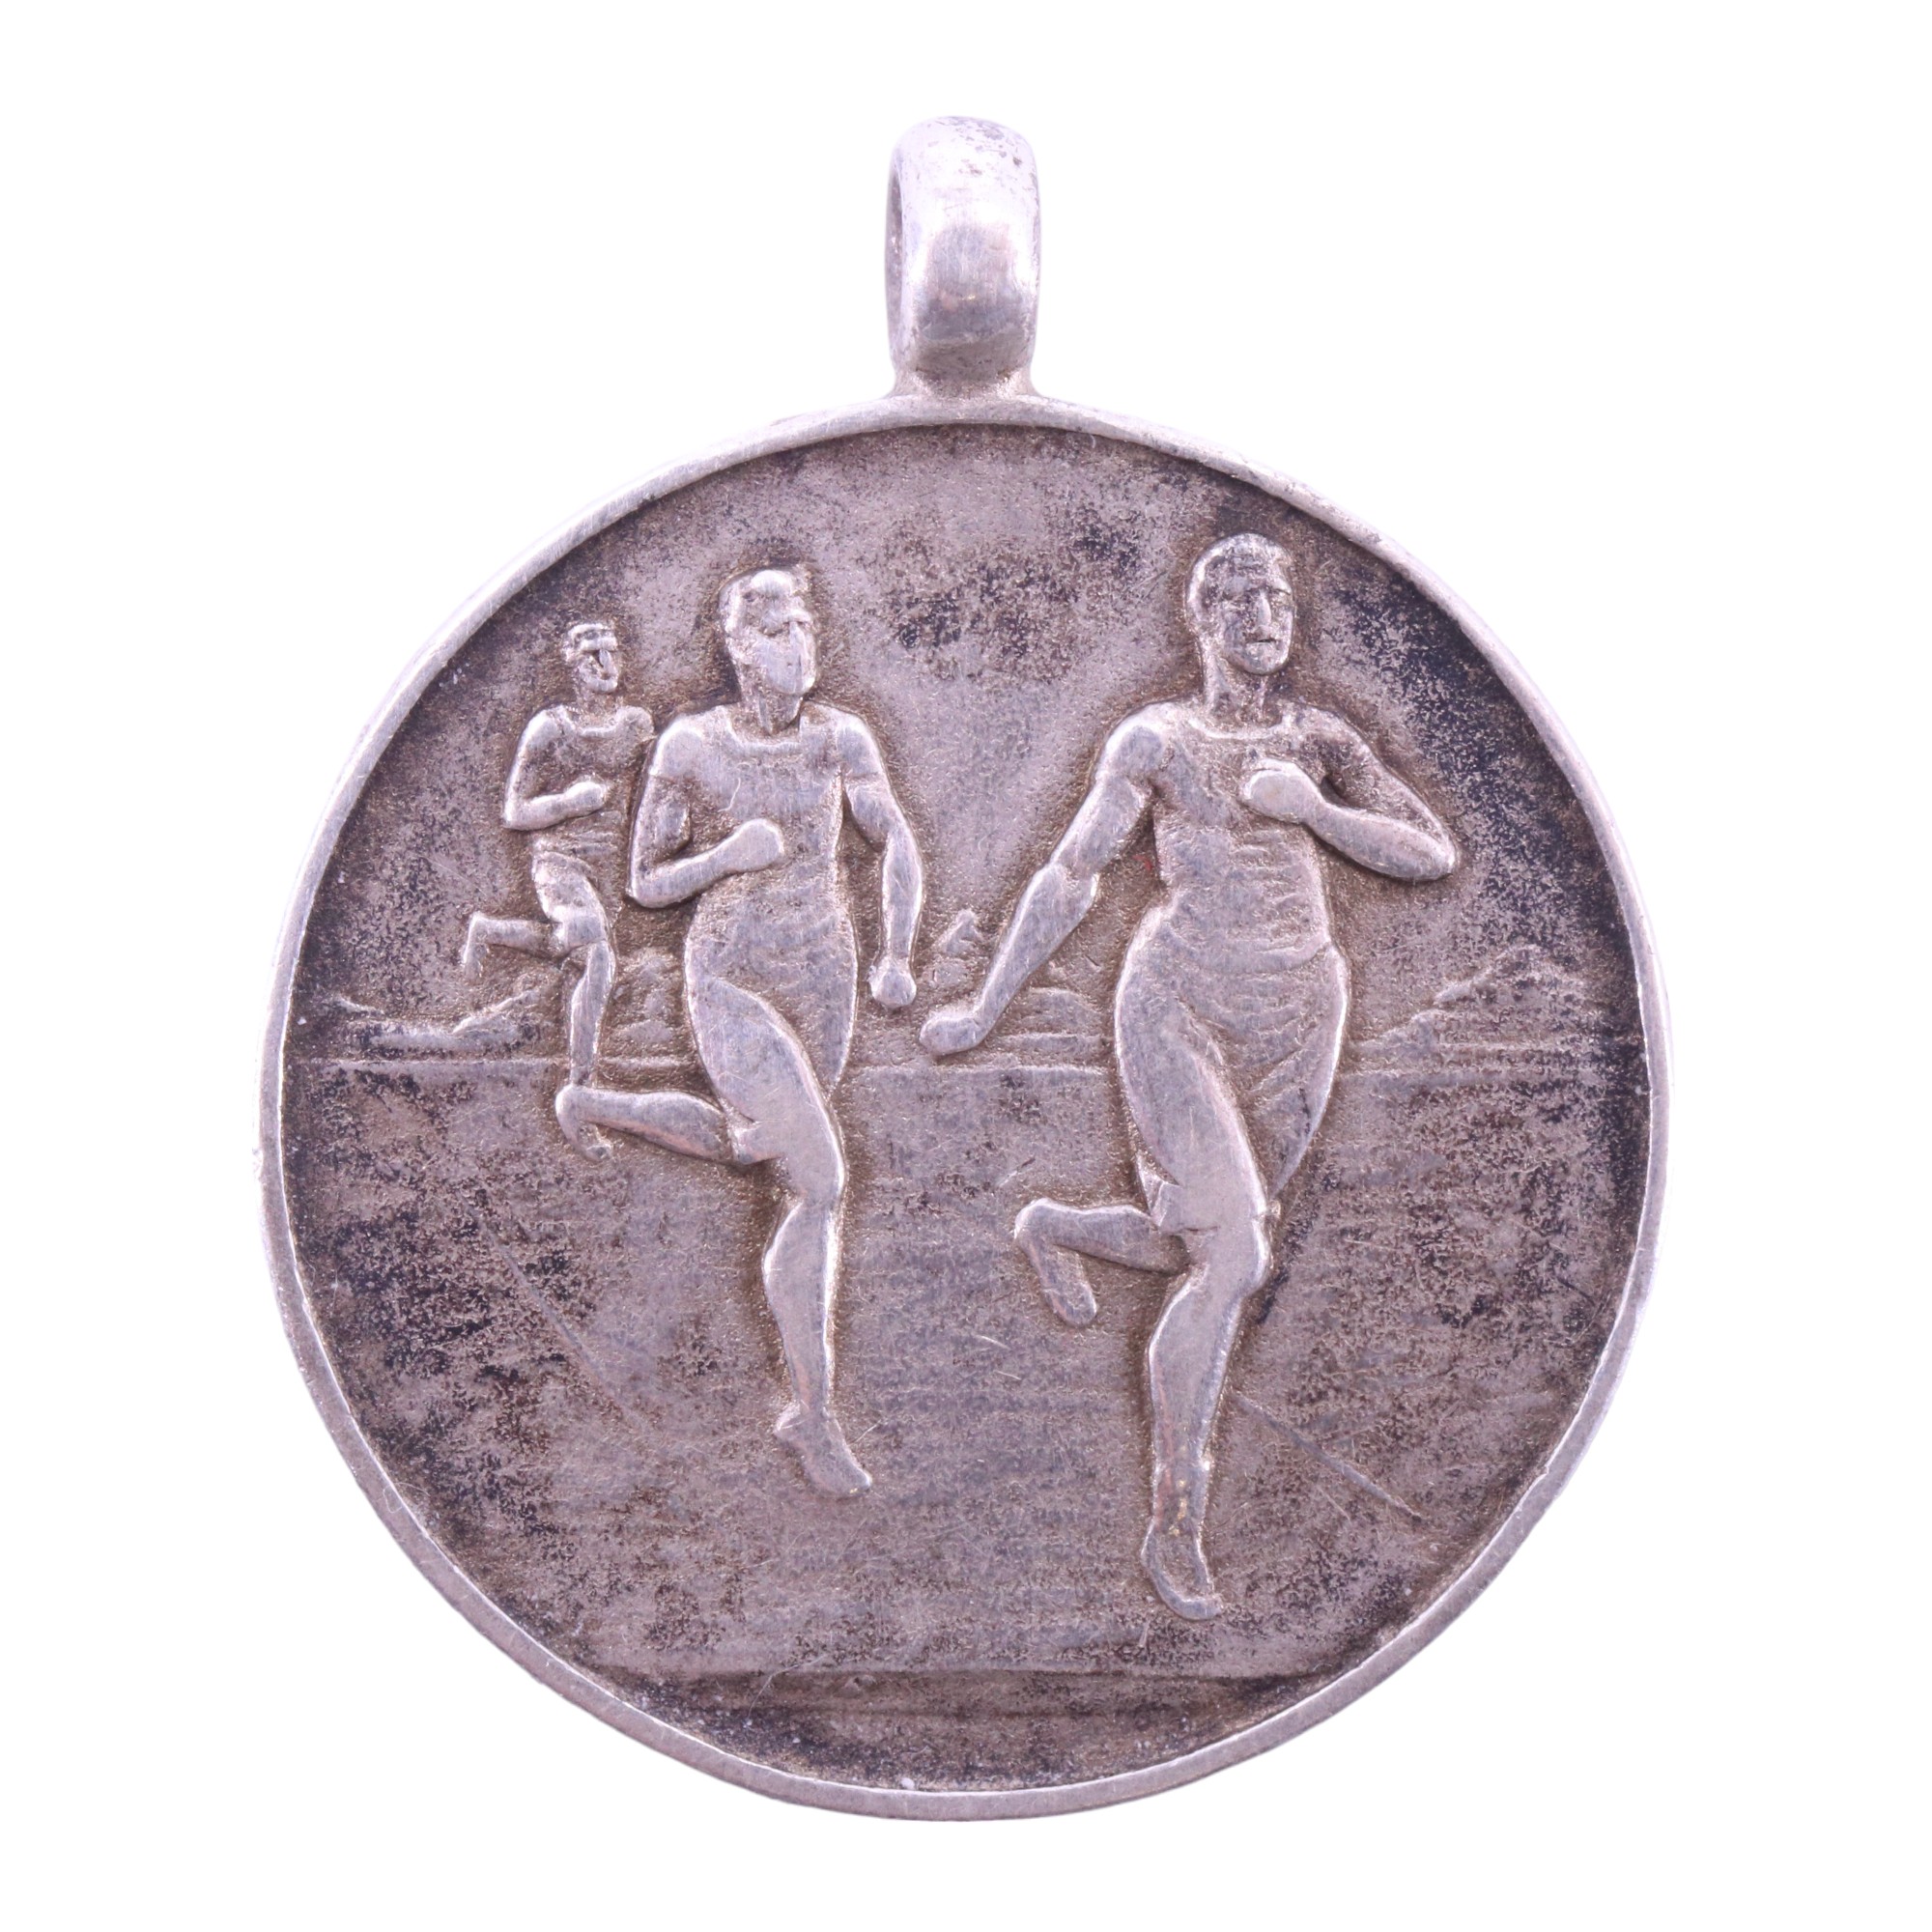 A 1936 Hoover Olympic Games enamelled silver medal, 25 mm - Image 2 of 2